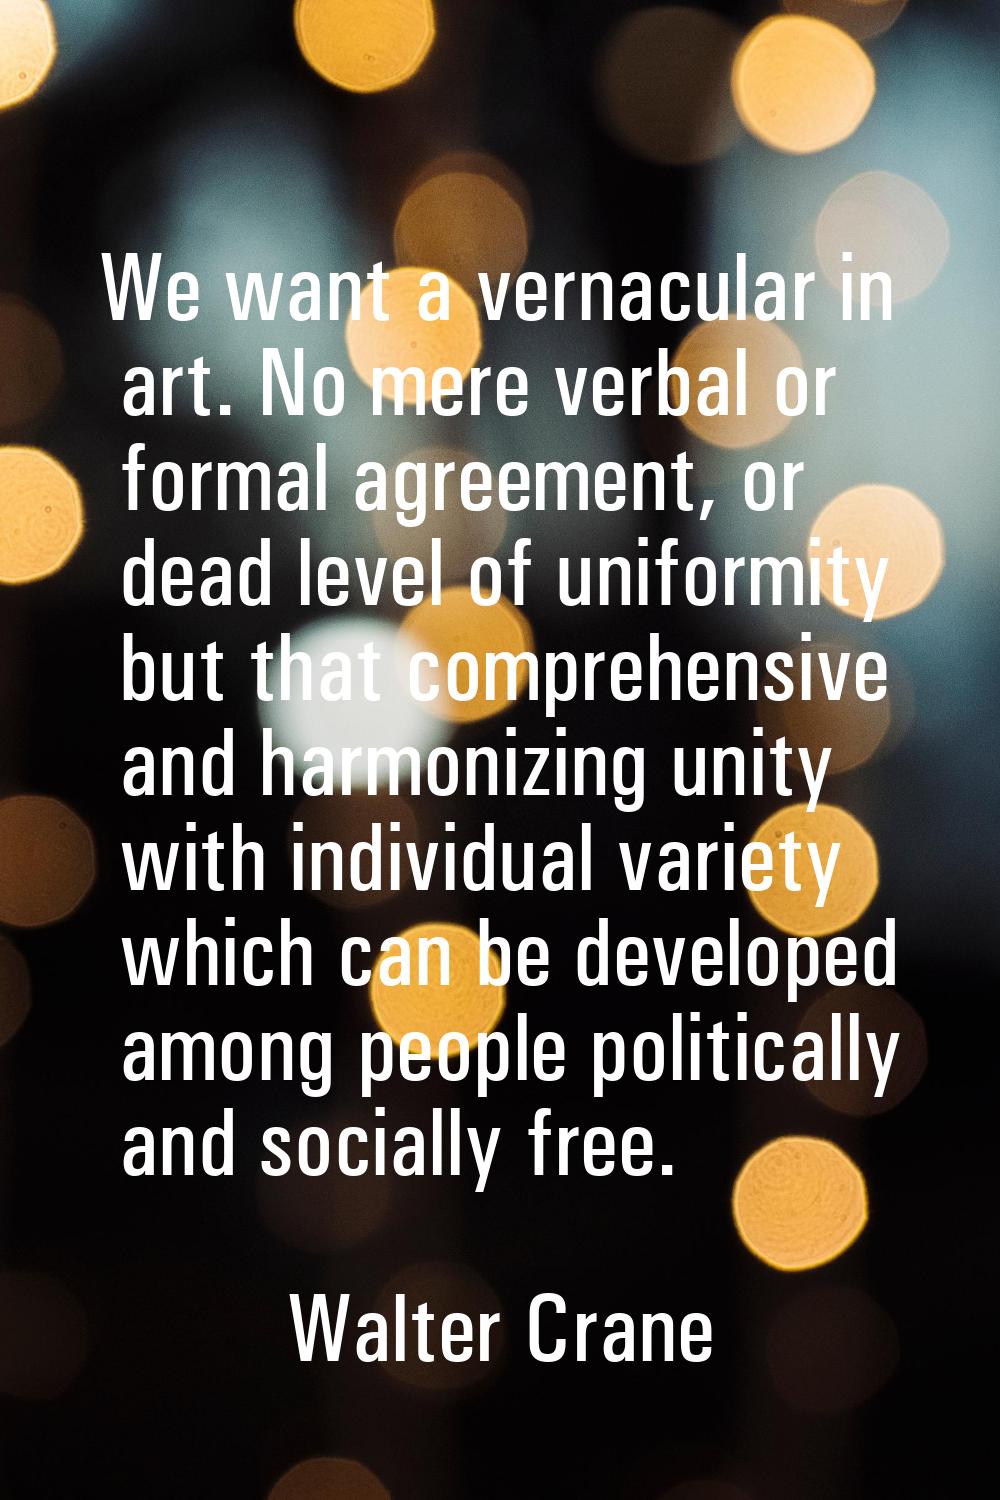 We want a vernacular in art. No mere verbal or formal agreement, or dead level of uniformity but th